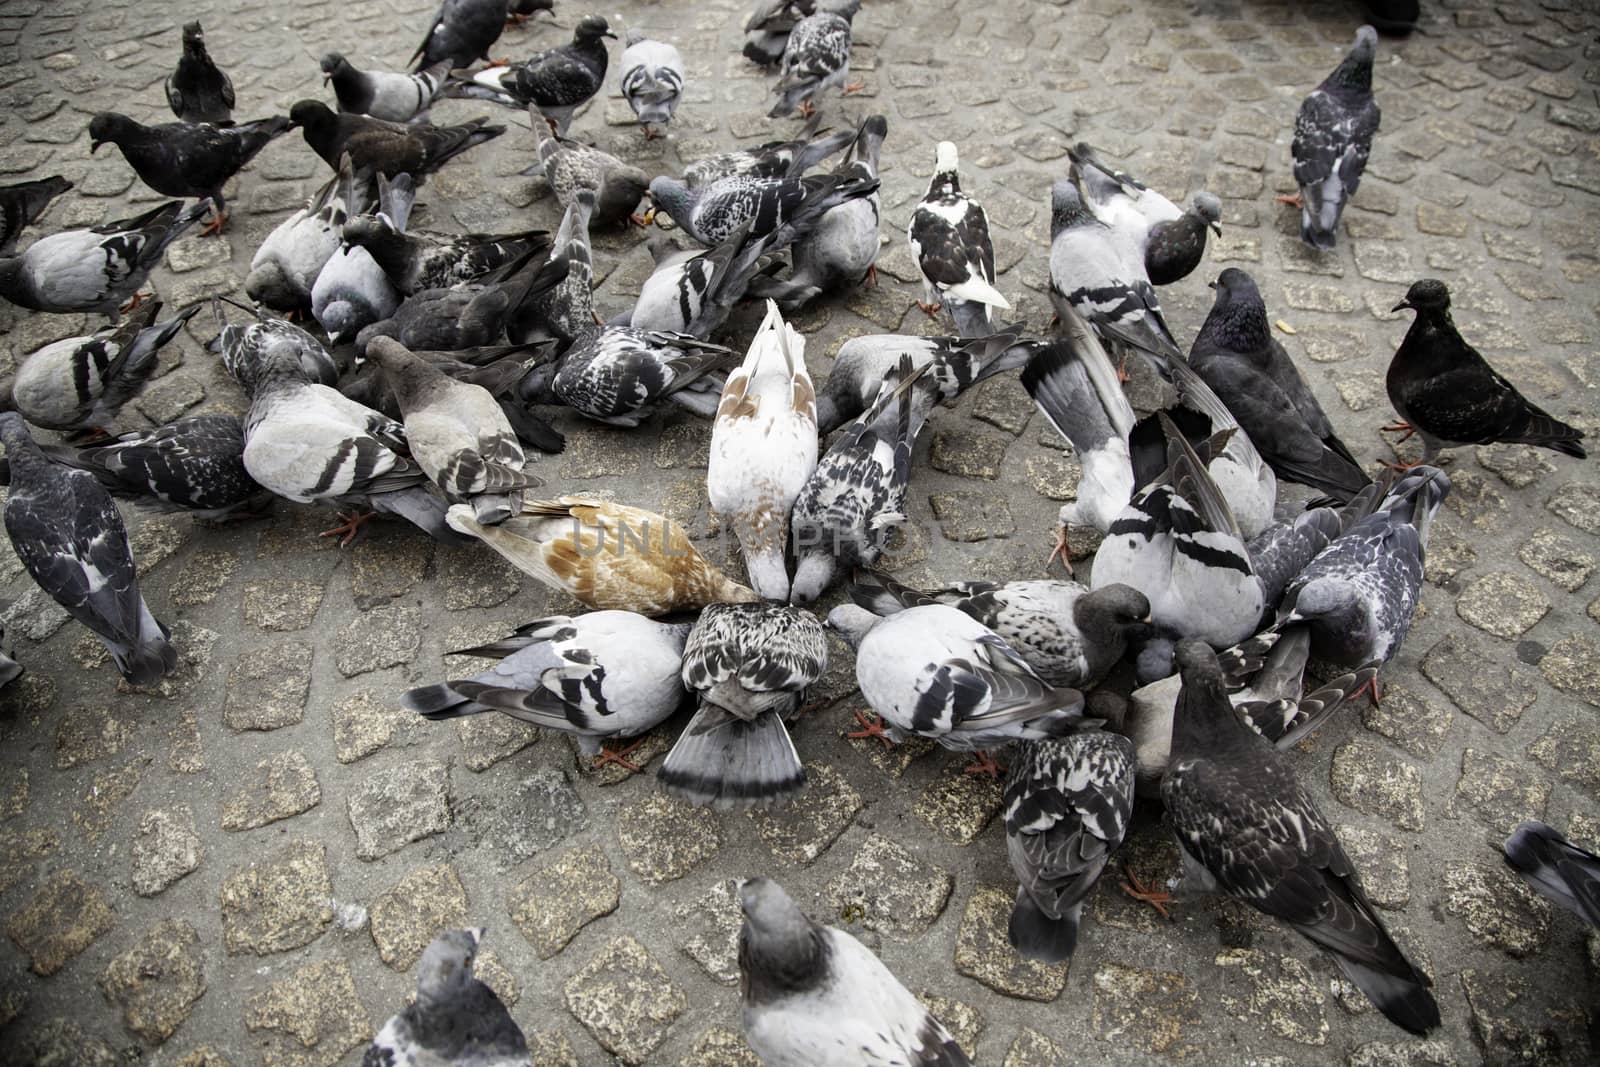 Pigeons in the square, detail of birds alimentandose